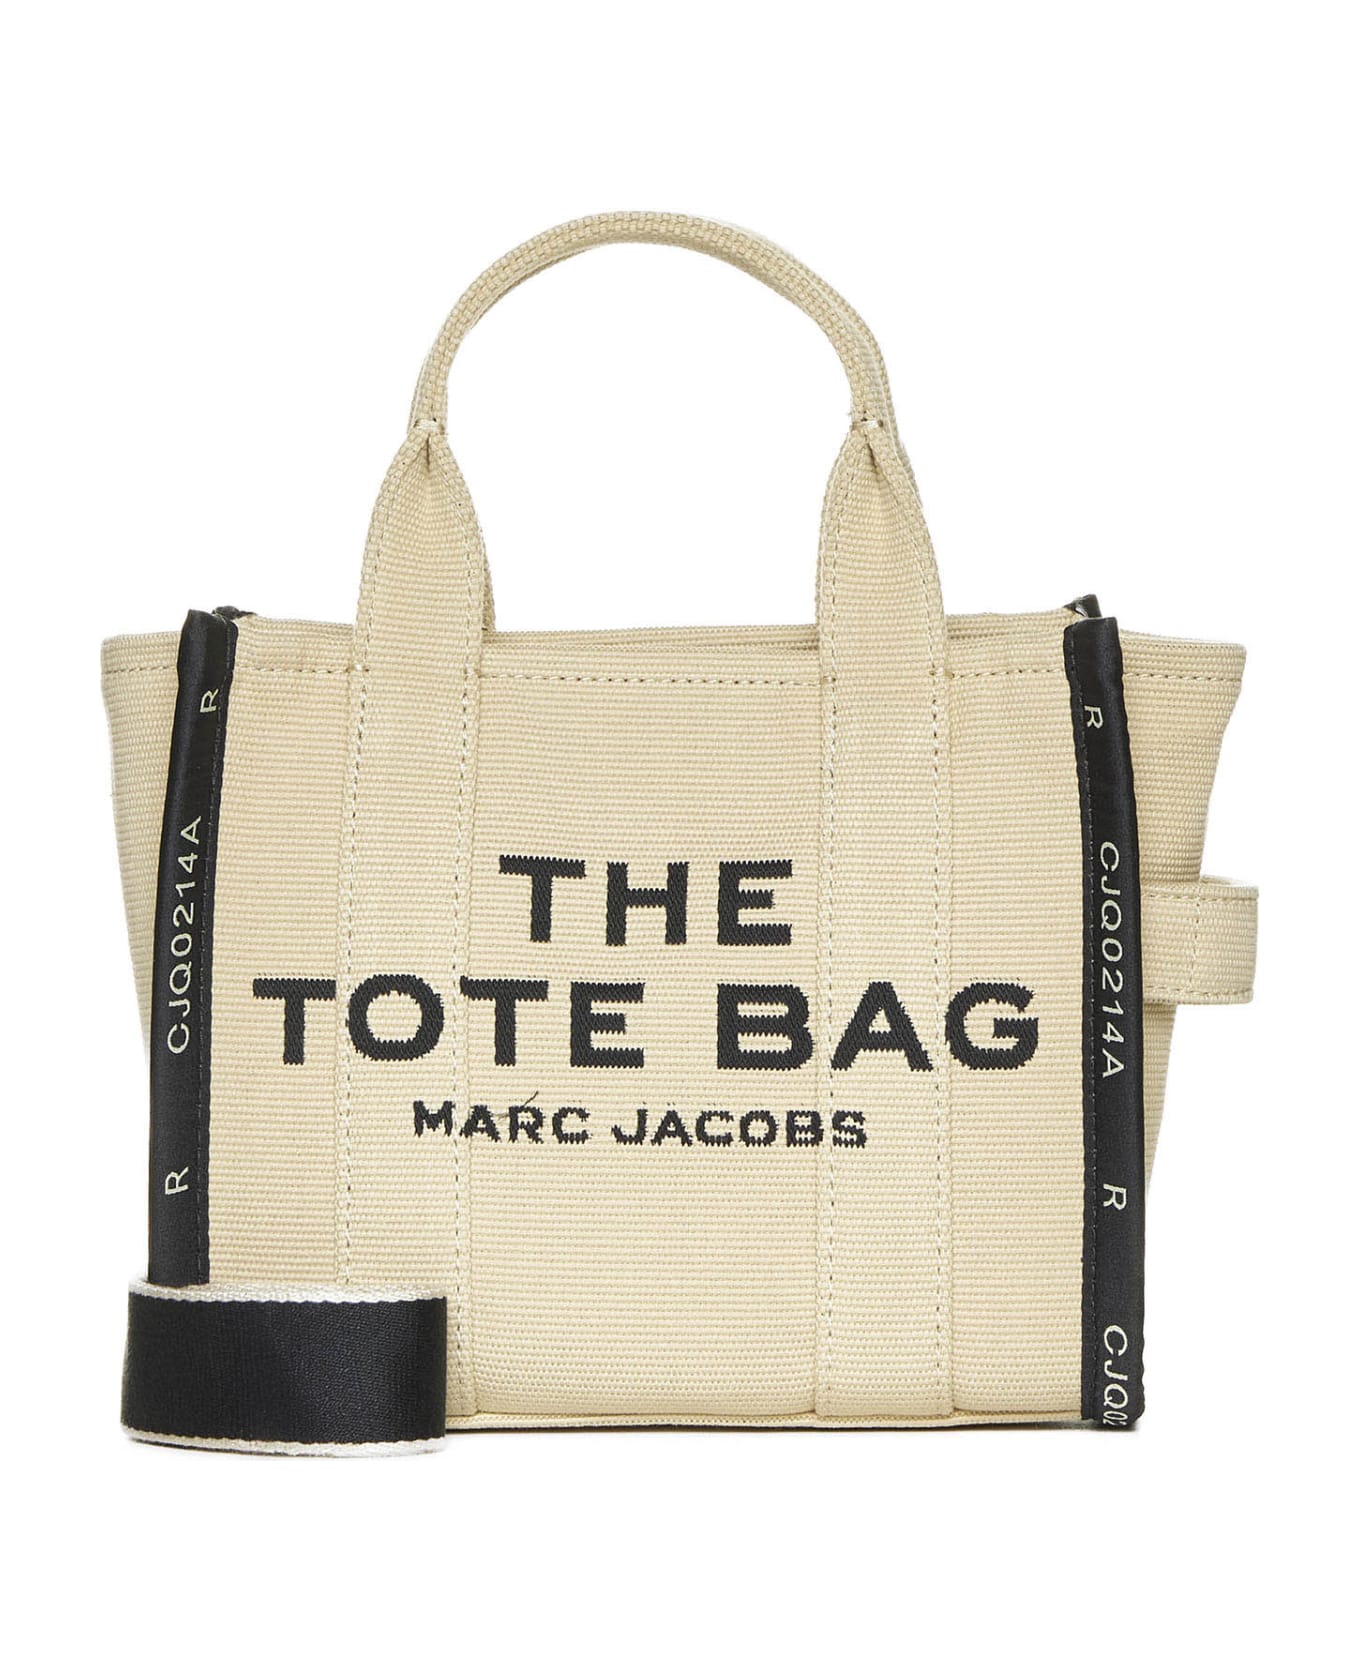 Marc Jacobs Tote - Warm sand